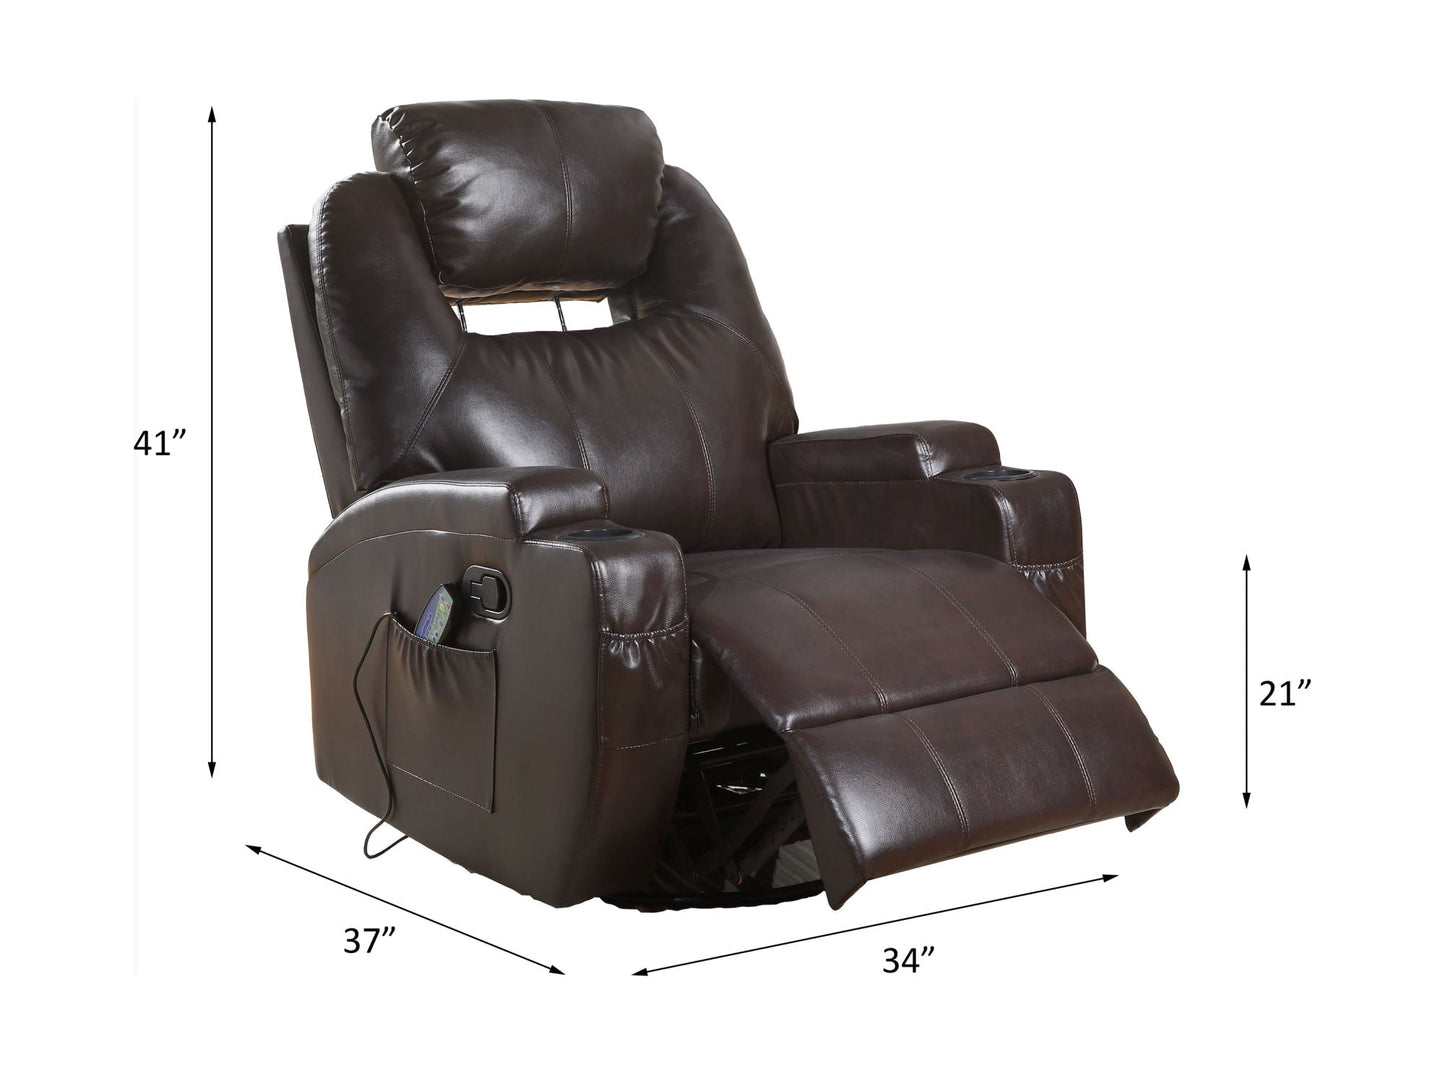 ACME Waterlily Rocker Recliner (Motion) in Brown PU 59278 Home Decor by Design